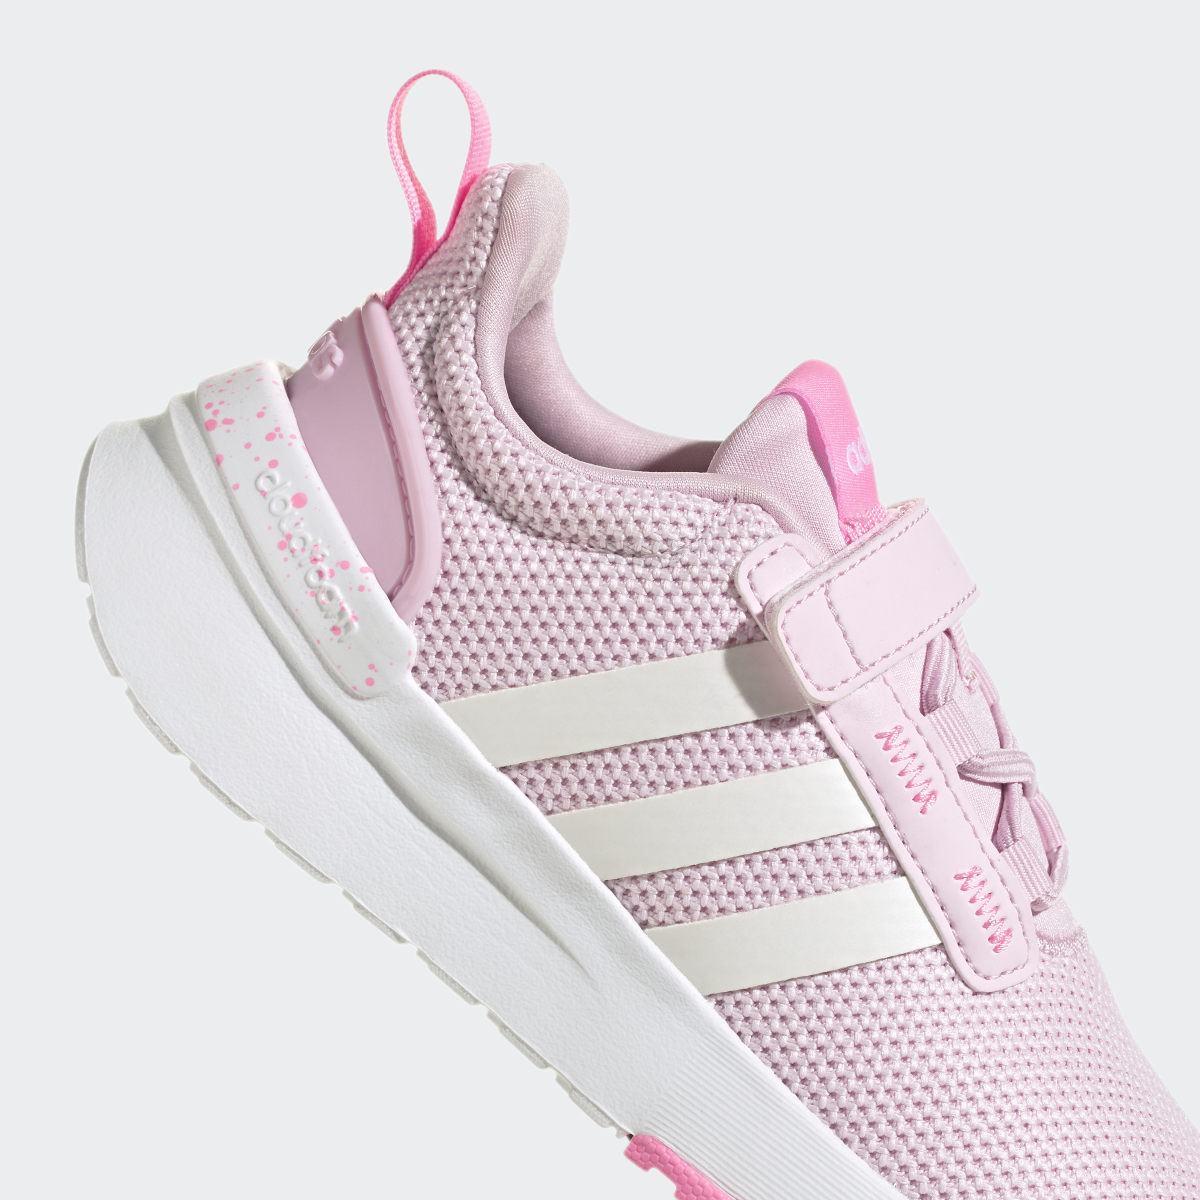 Adidas Racer TR21 Shoes. 8